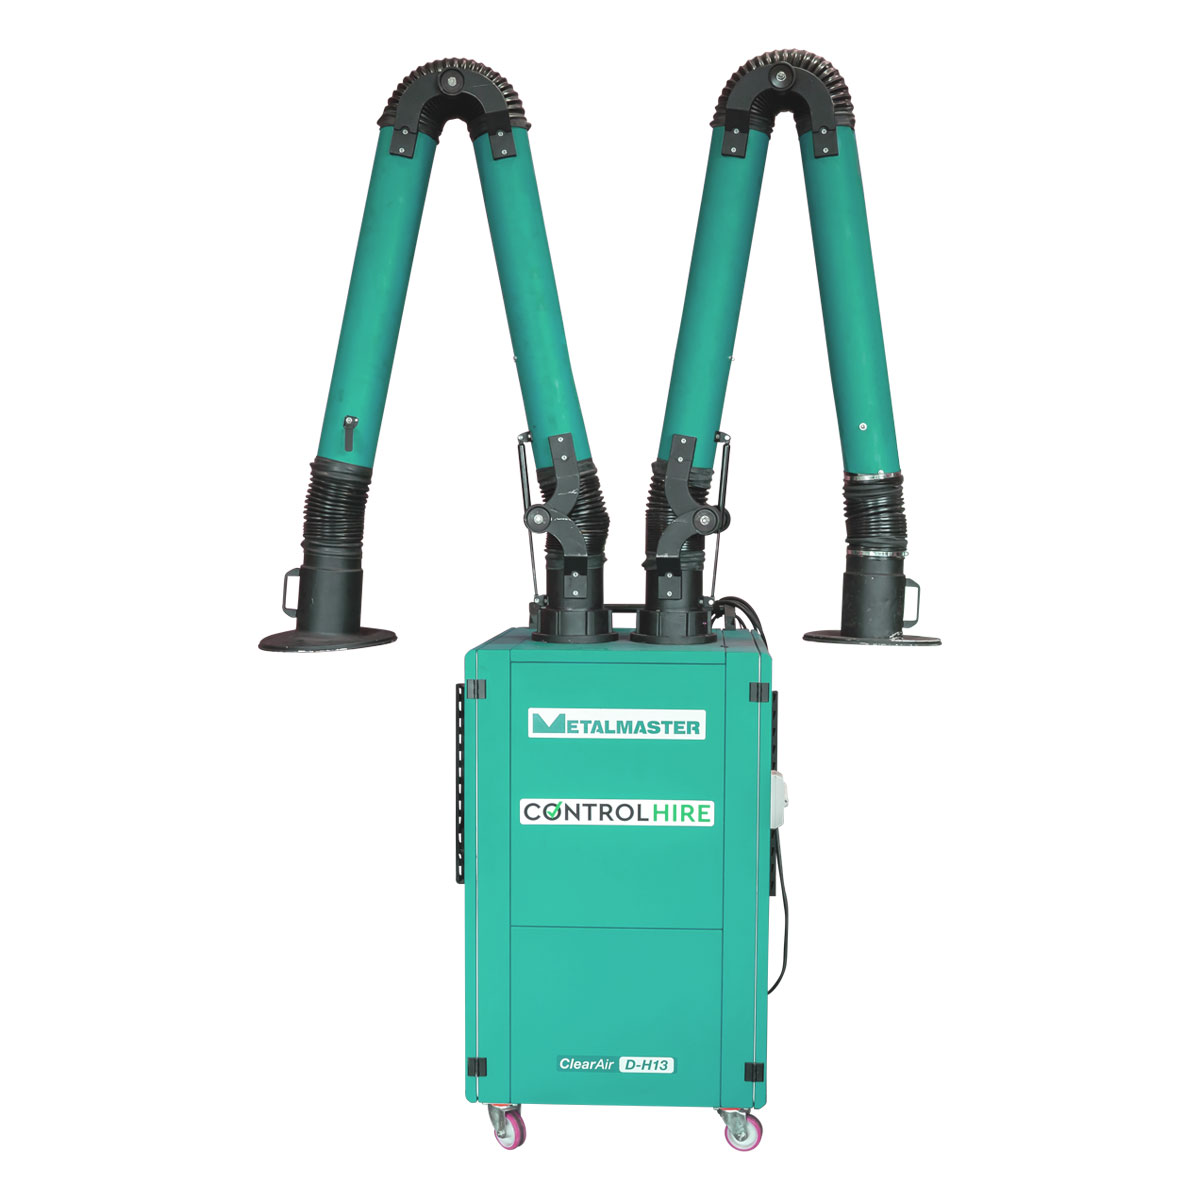 Twin Arm Mobile Welding Fume Filter